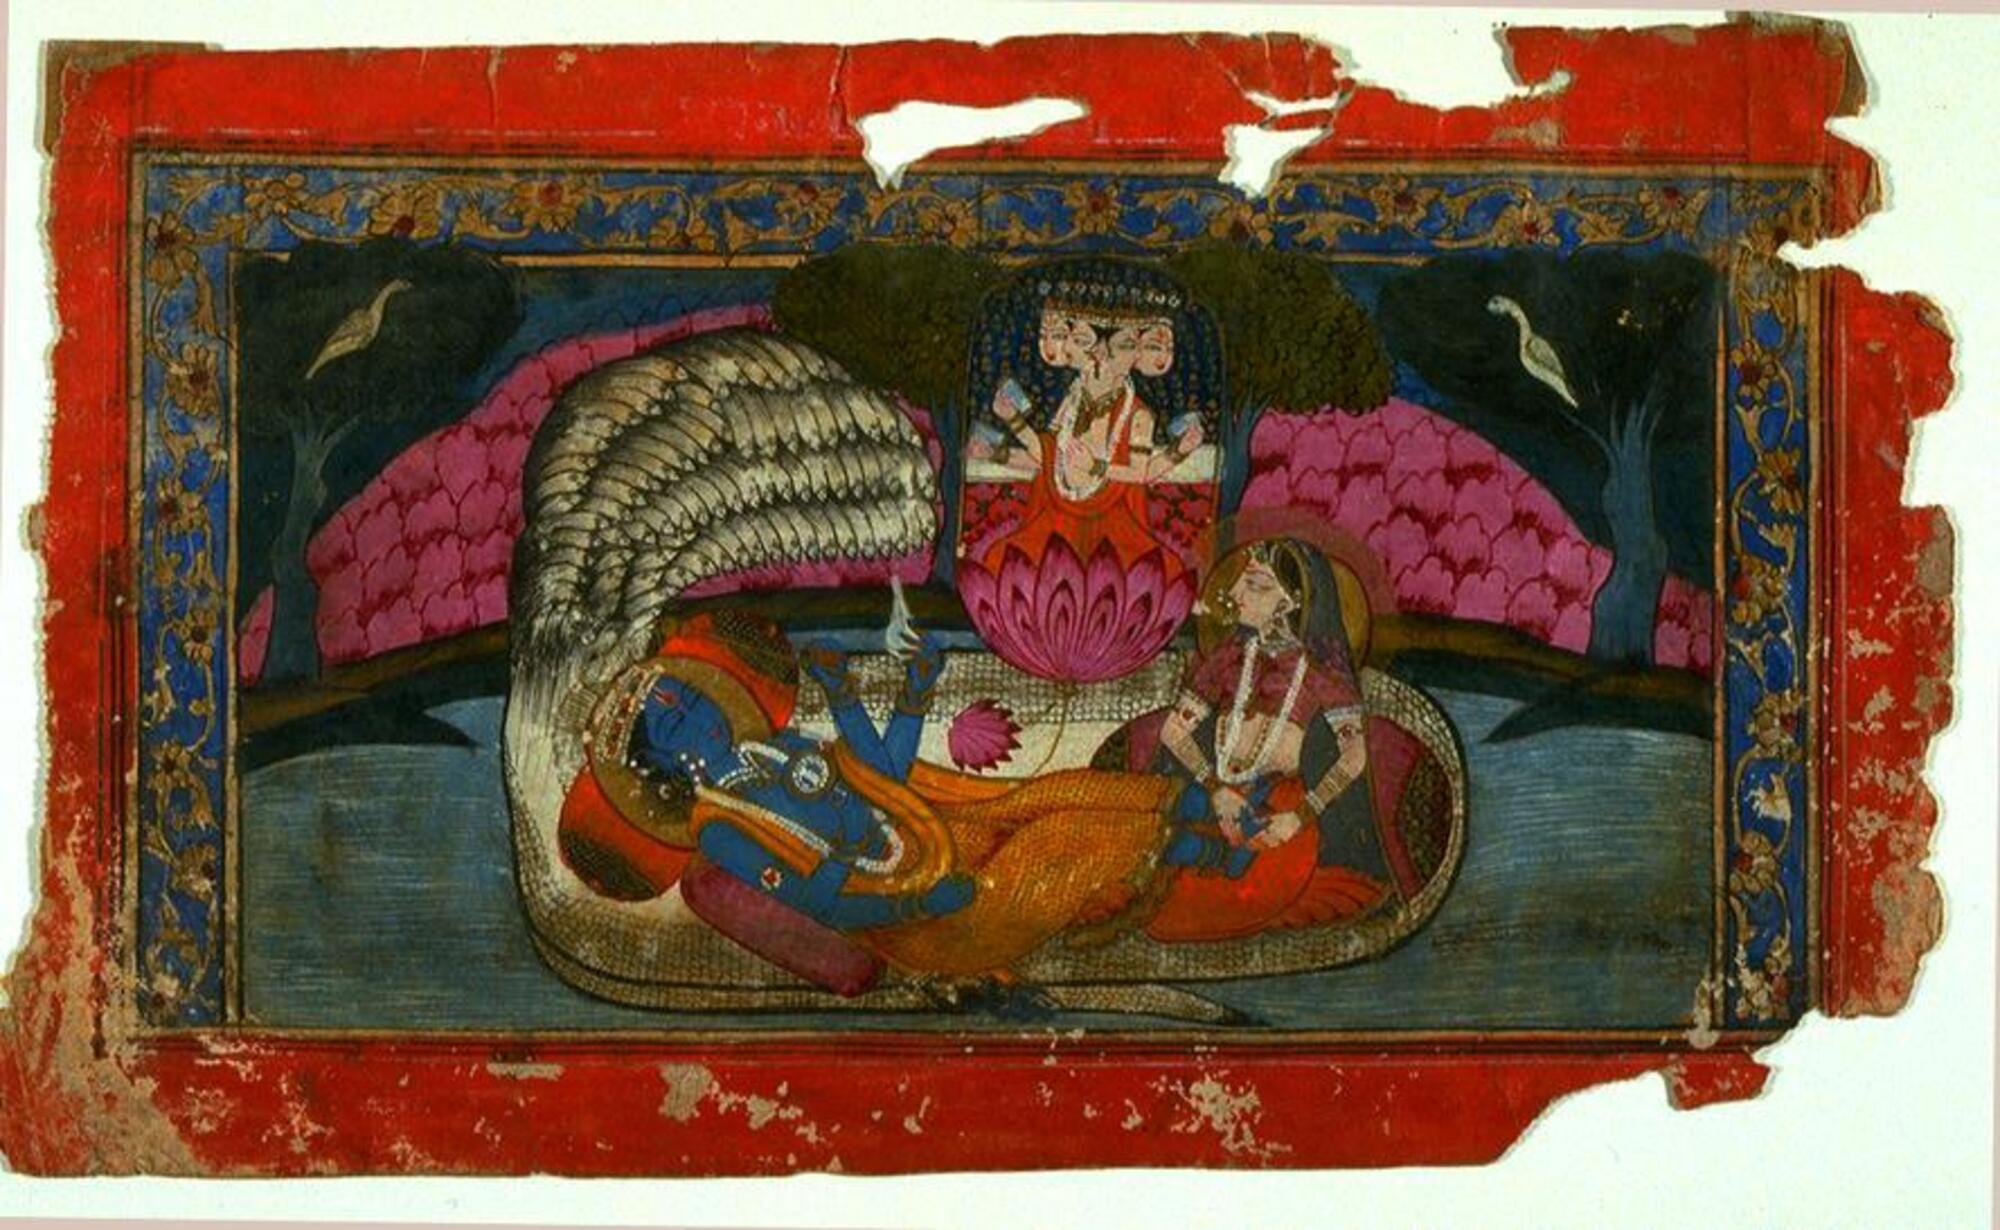 Two central figures are on a large snake; one a reclining blue-skinned figure, the other a seated female to his right. The female figure is holding his feet. A lotus flower grows out of his navel and from the lotus, a four-headed figure. The background is a landscape.